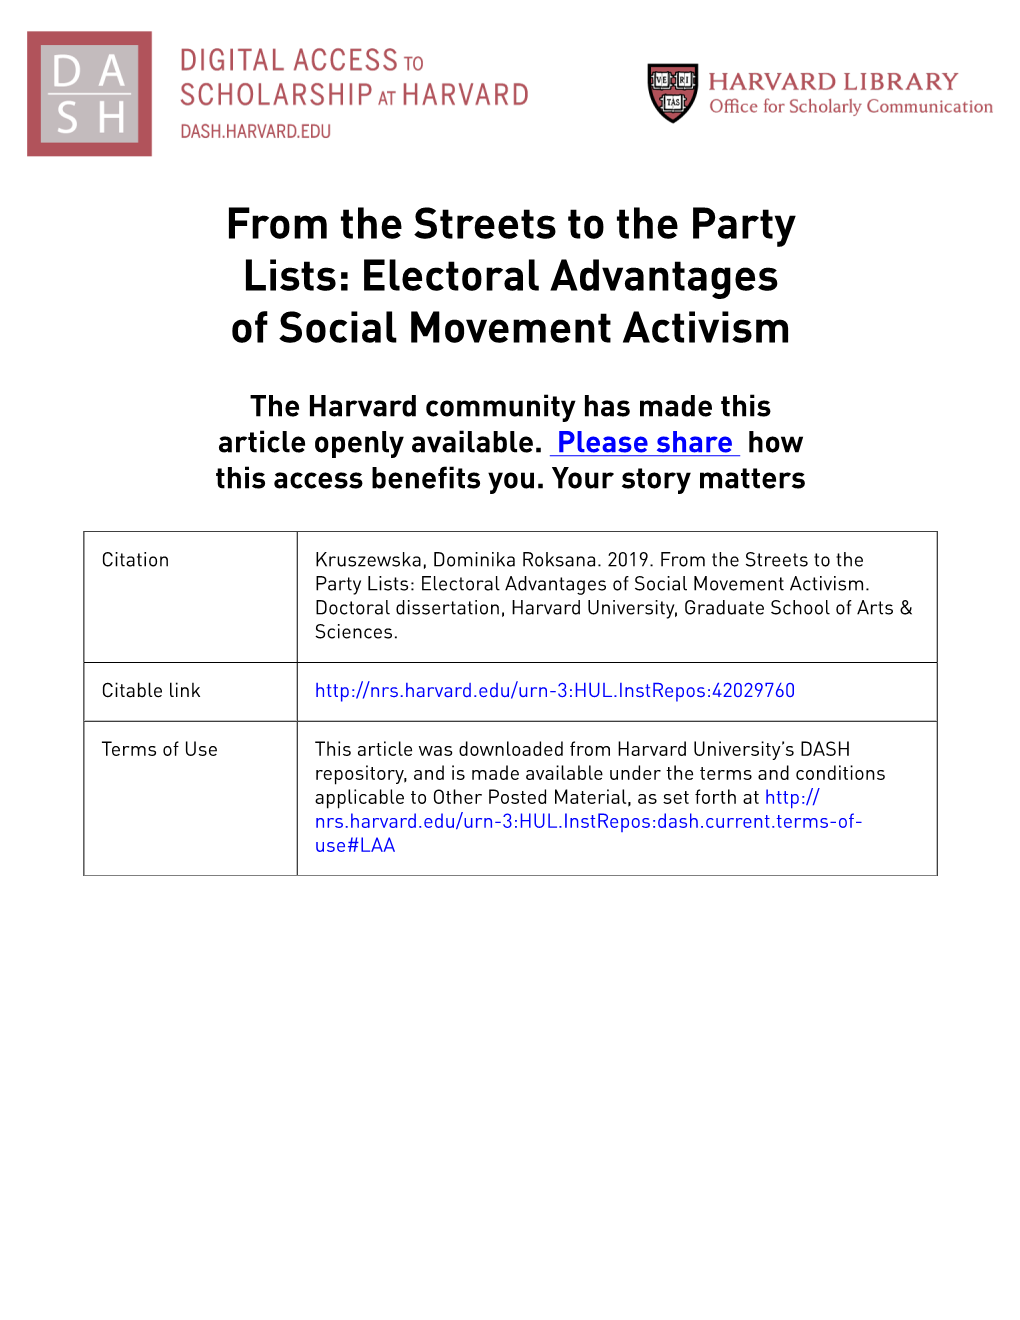 From the Streets to the Party Lists: Electoral Advantages of Social Movement Activism